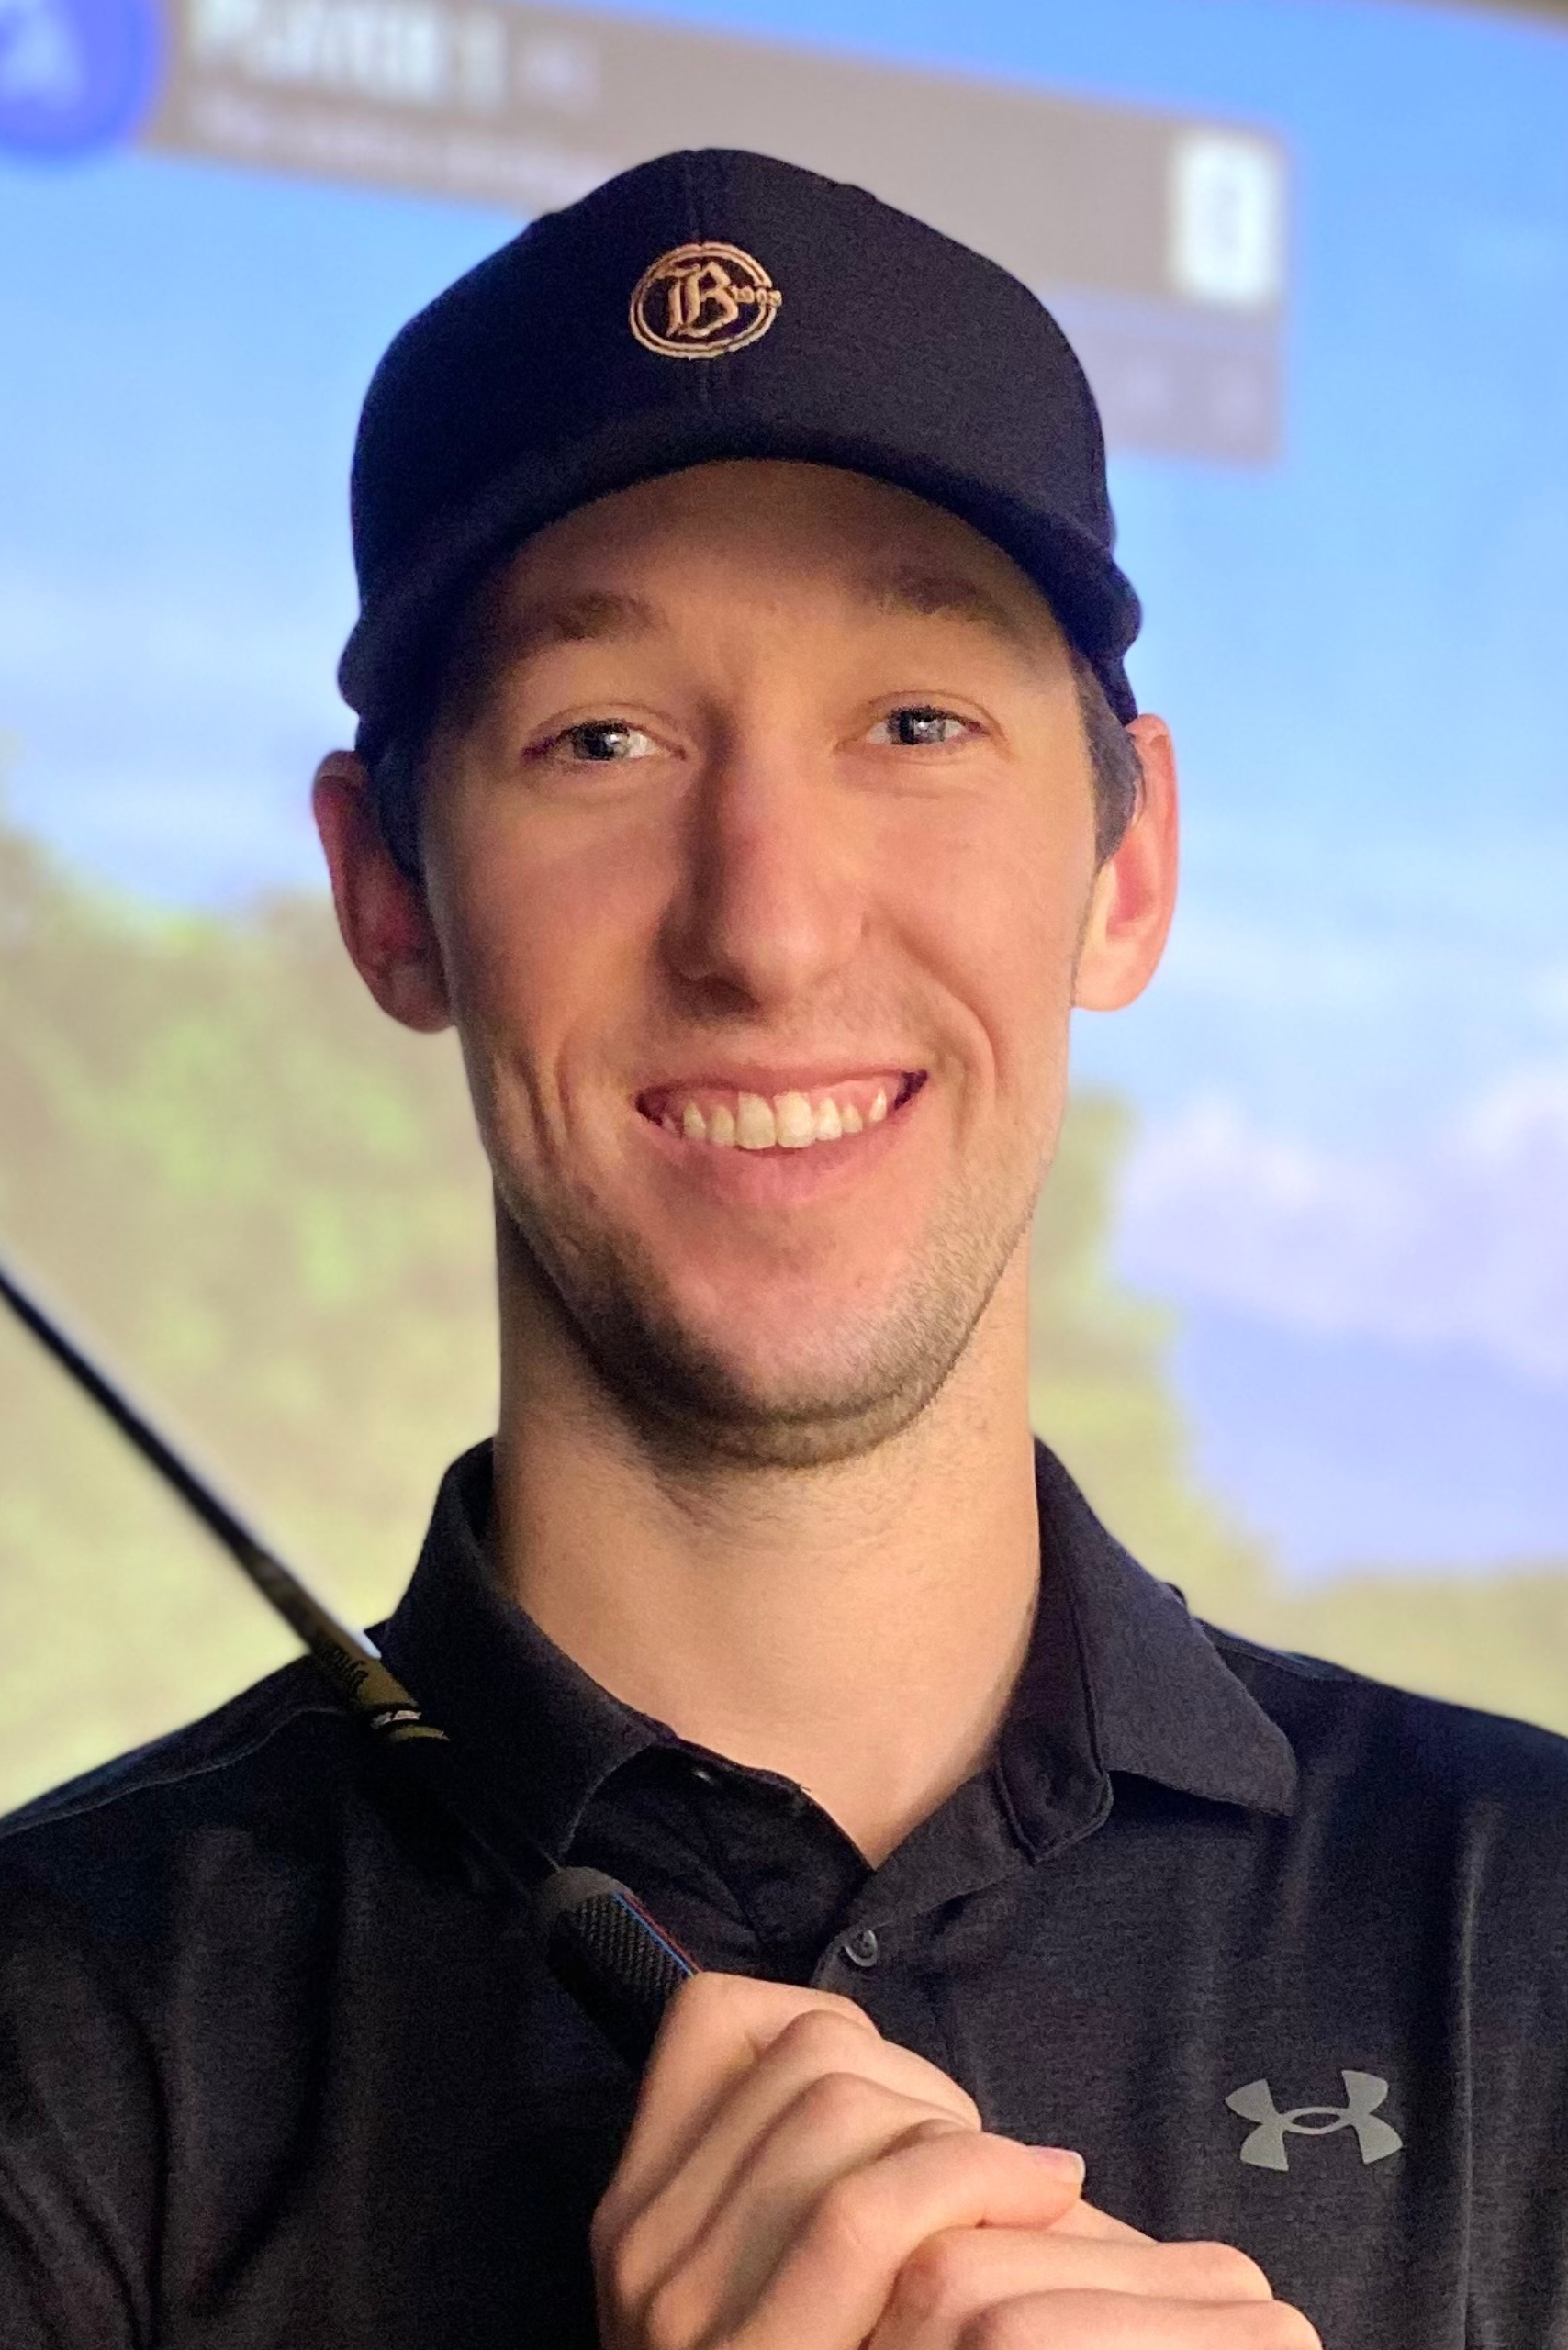 Grant Barracchini, golf pro affiliated with OnPar Now